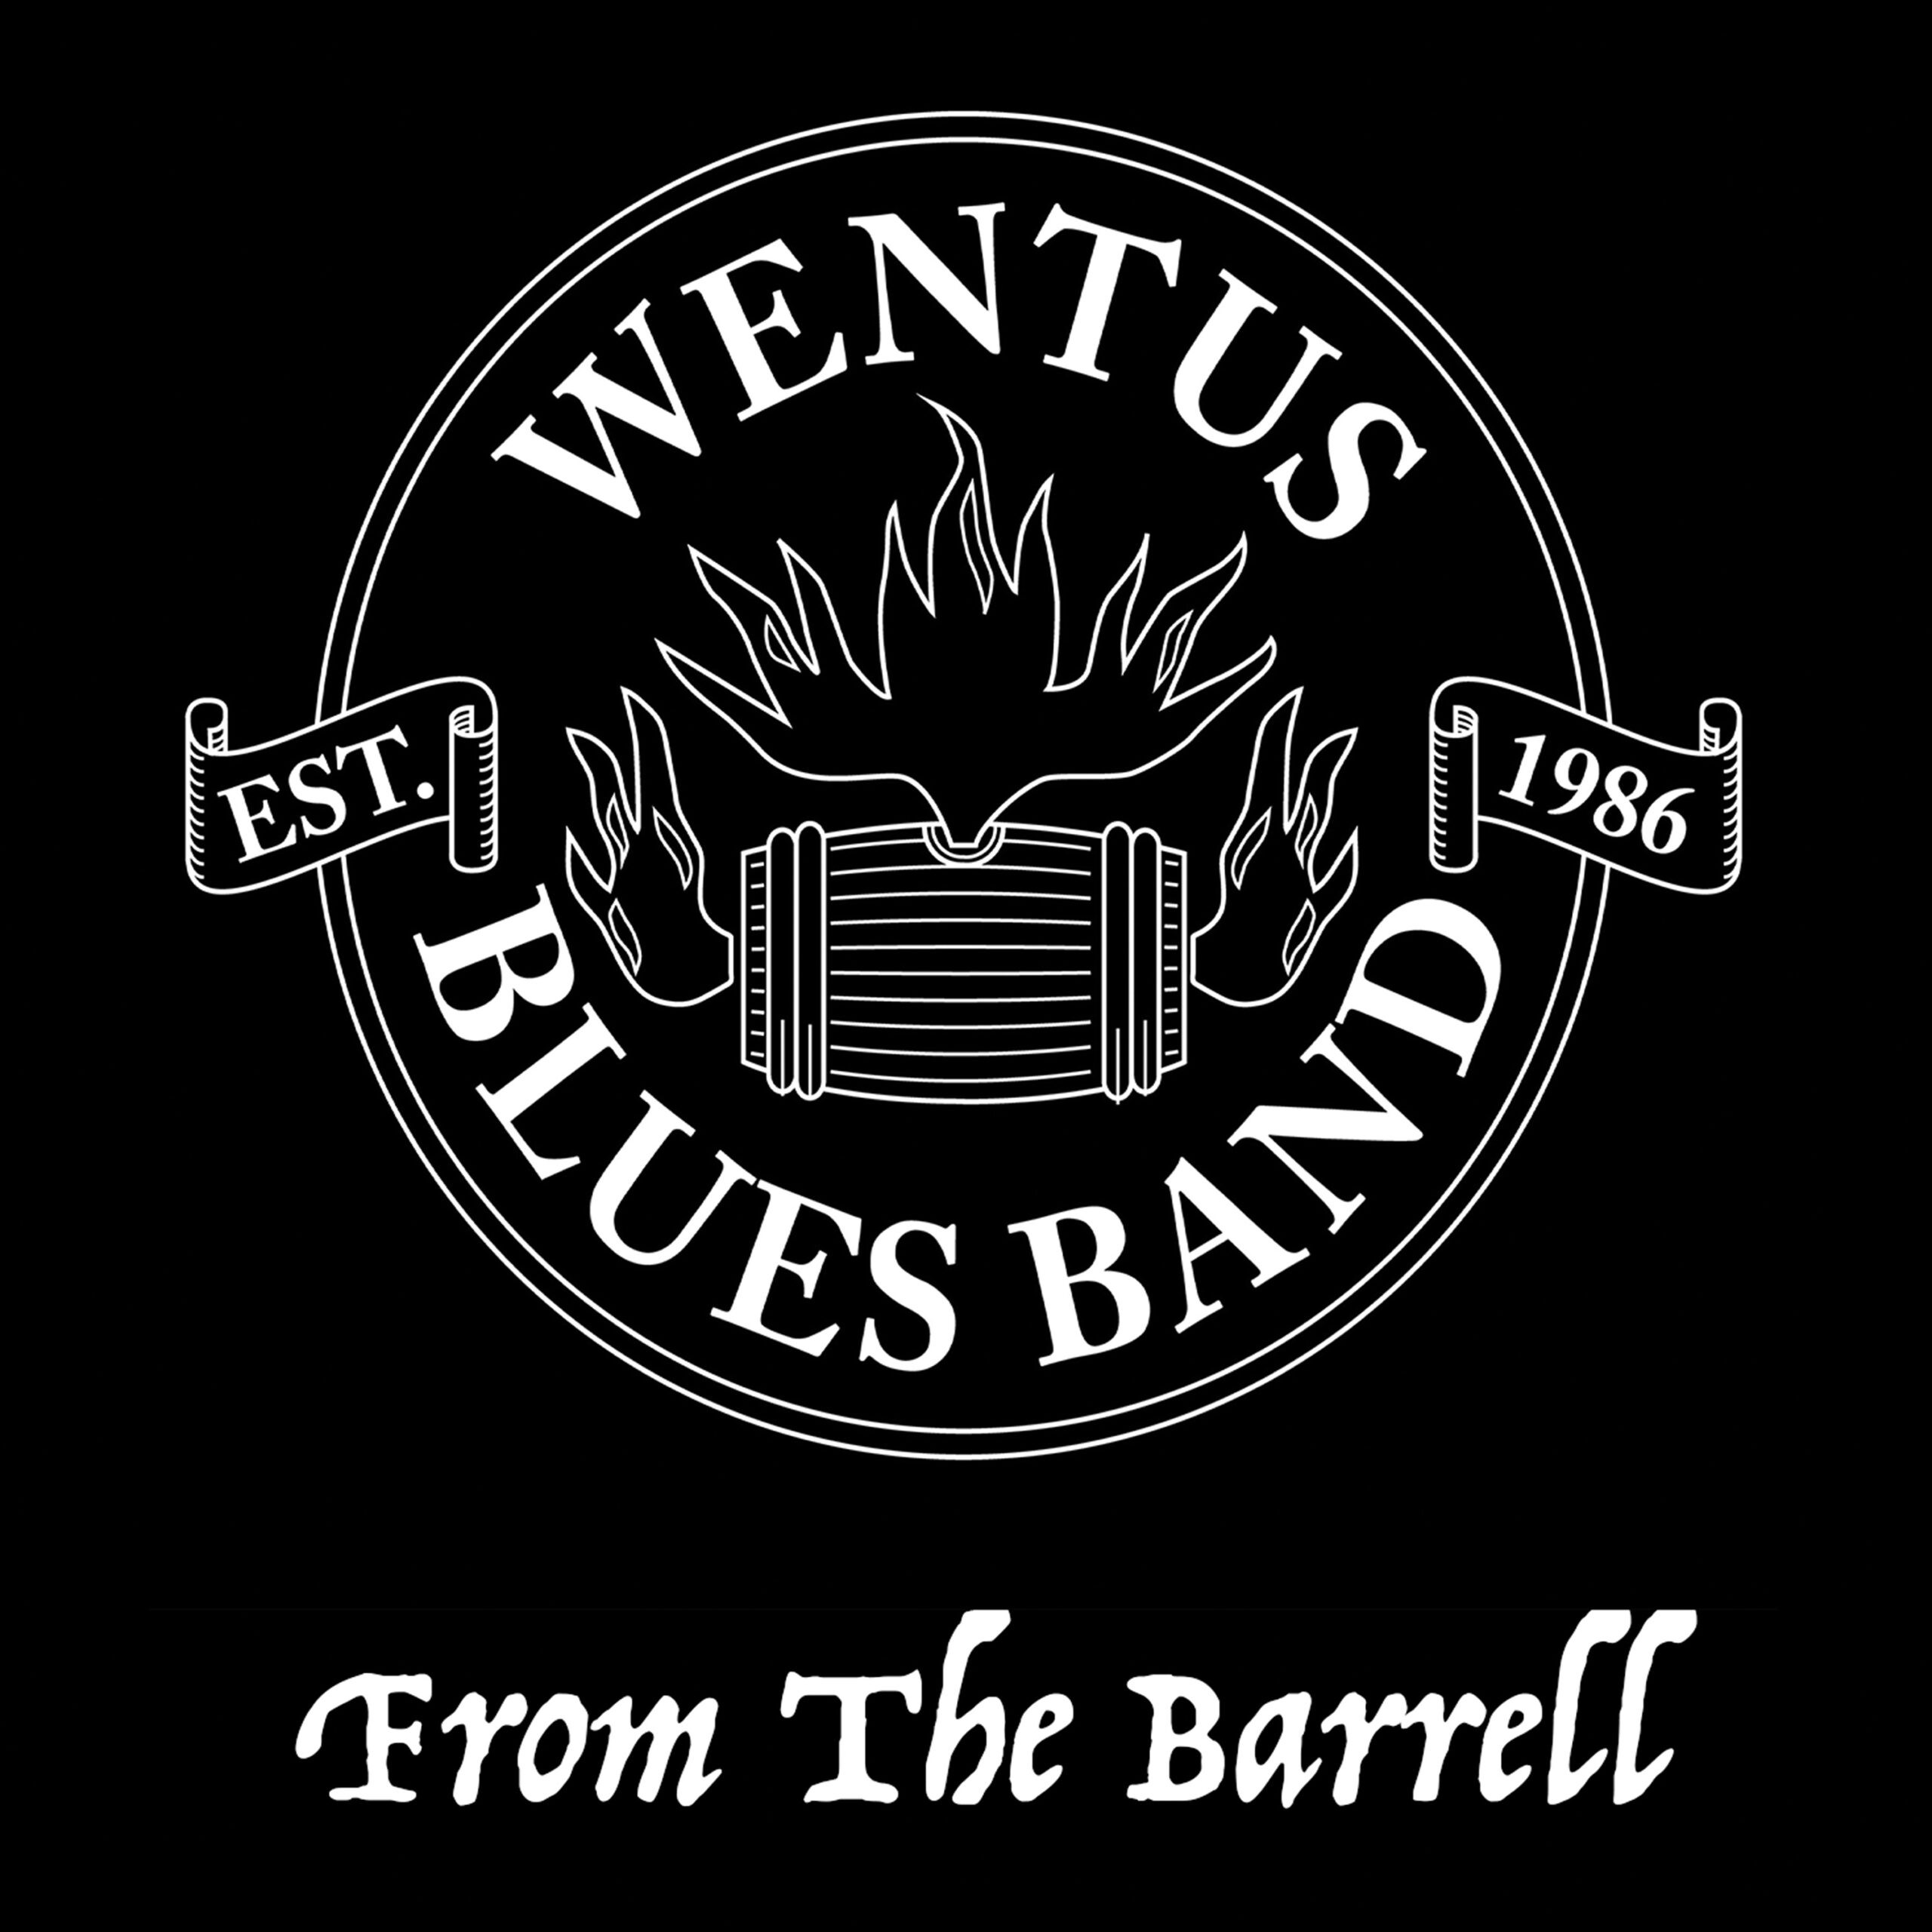 Wentus Blues Band - From The Barrel